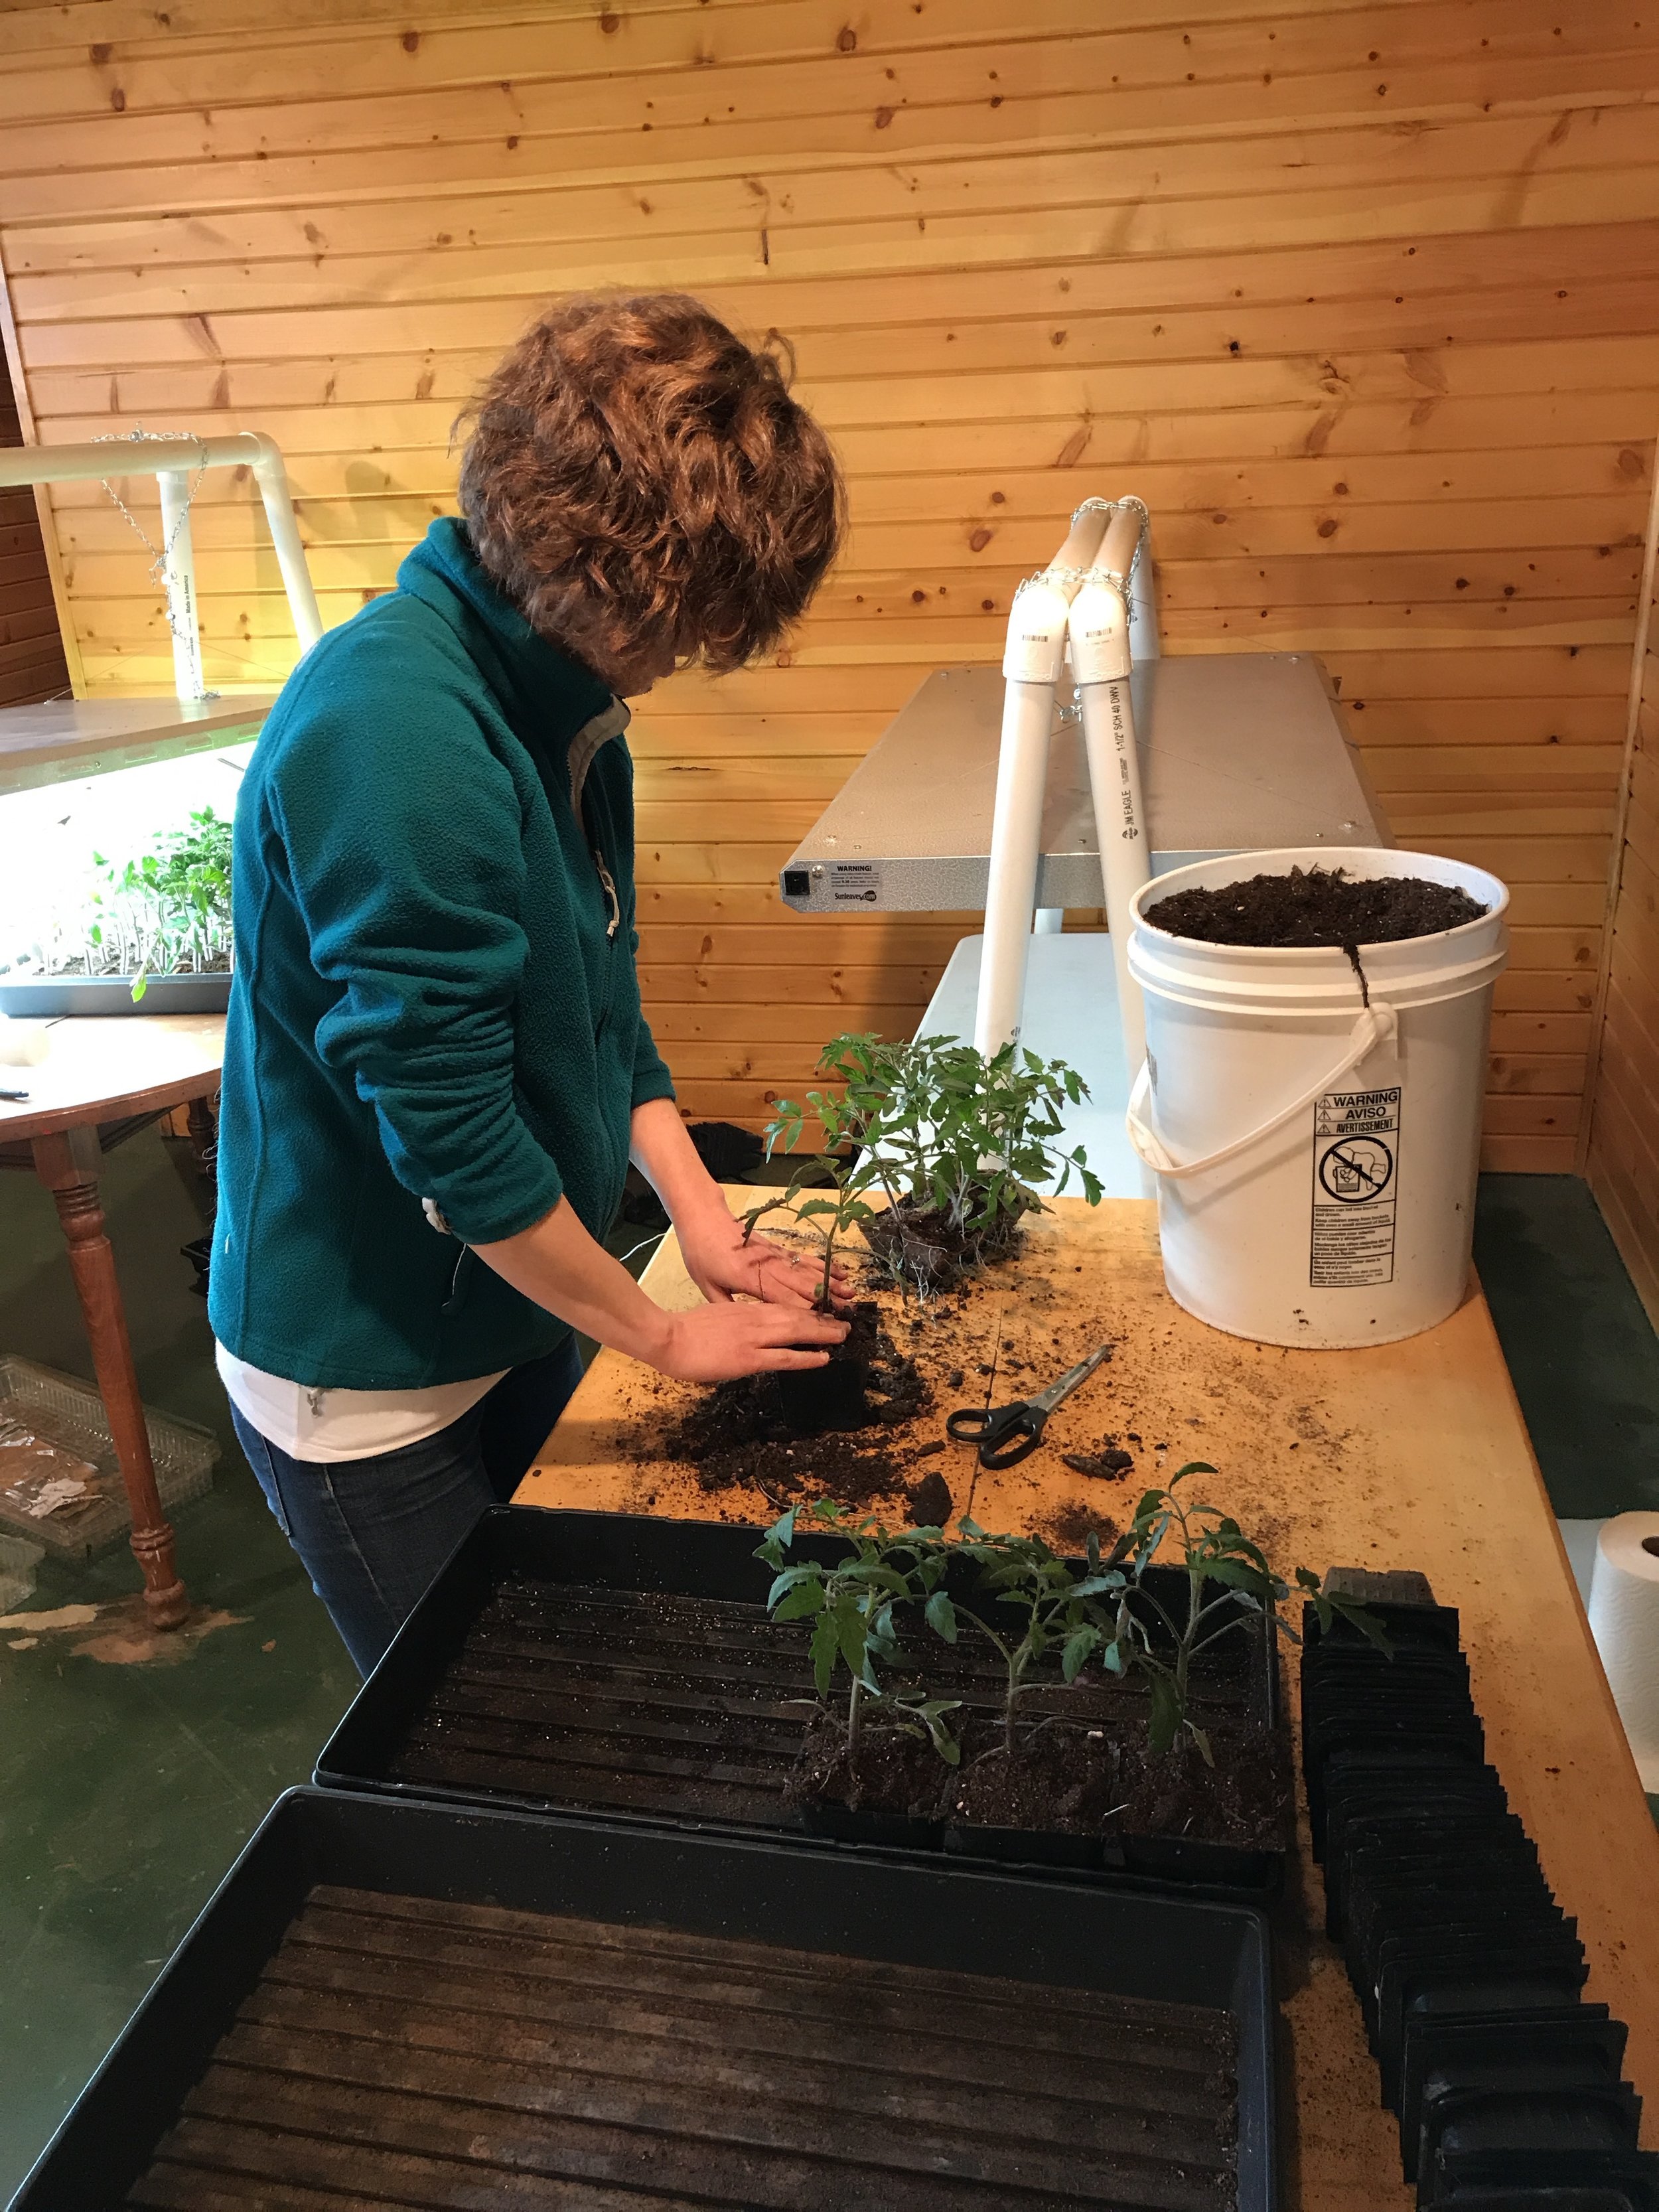  Lara is working on re-potting tomatoes in this picture. Our transplants have grown too large for their pots so we move them to larger pots since it's too early to plant them outdoors. 